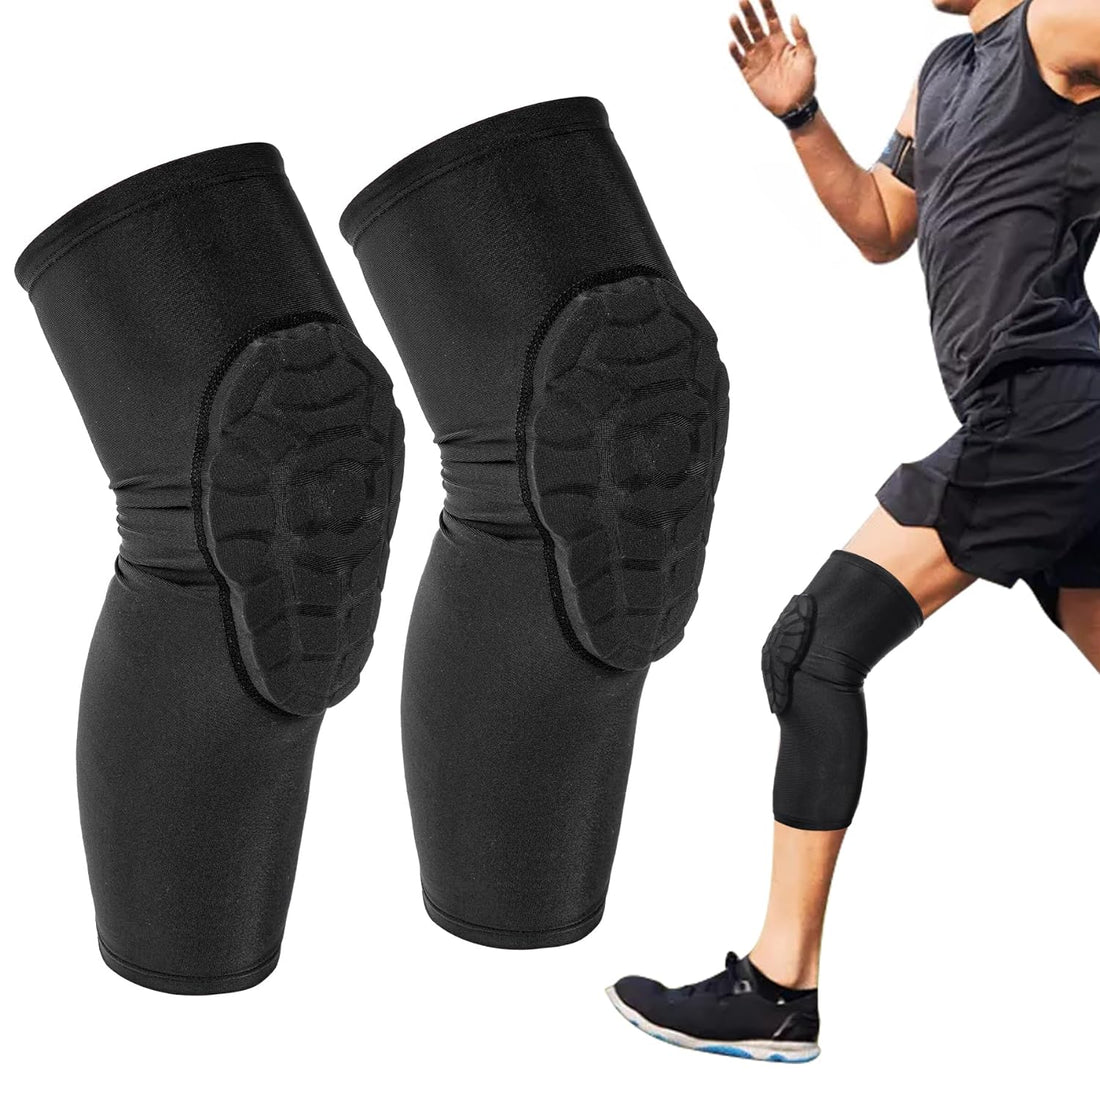 Topbuti Knee Pads for Youth Kids, Protective Gear Kneepad Knee Compression Padded Leg Sleeves for Volleyball Football Baseball Basketball Cycling (YXL, Black)